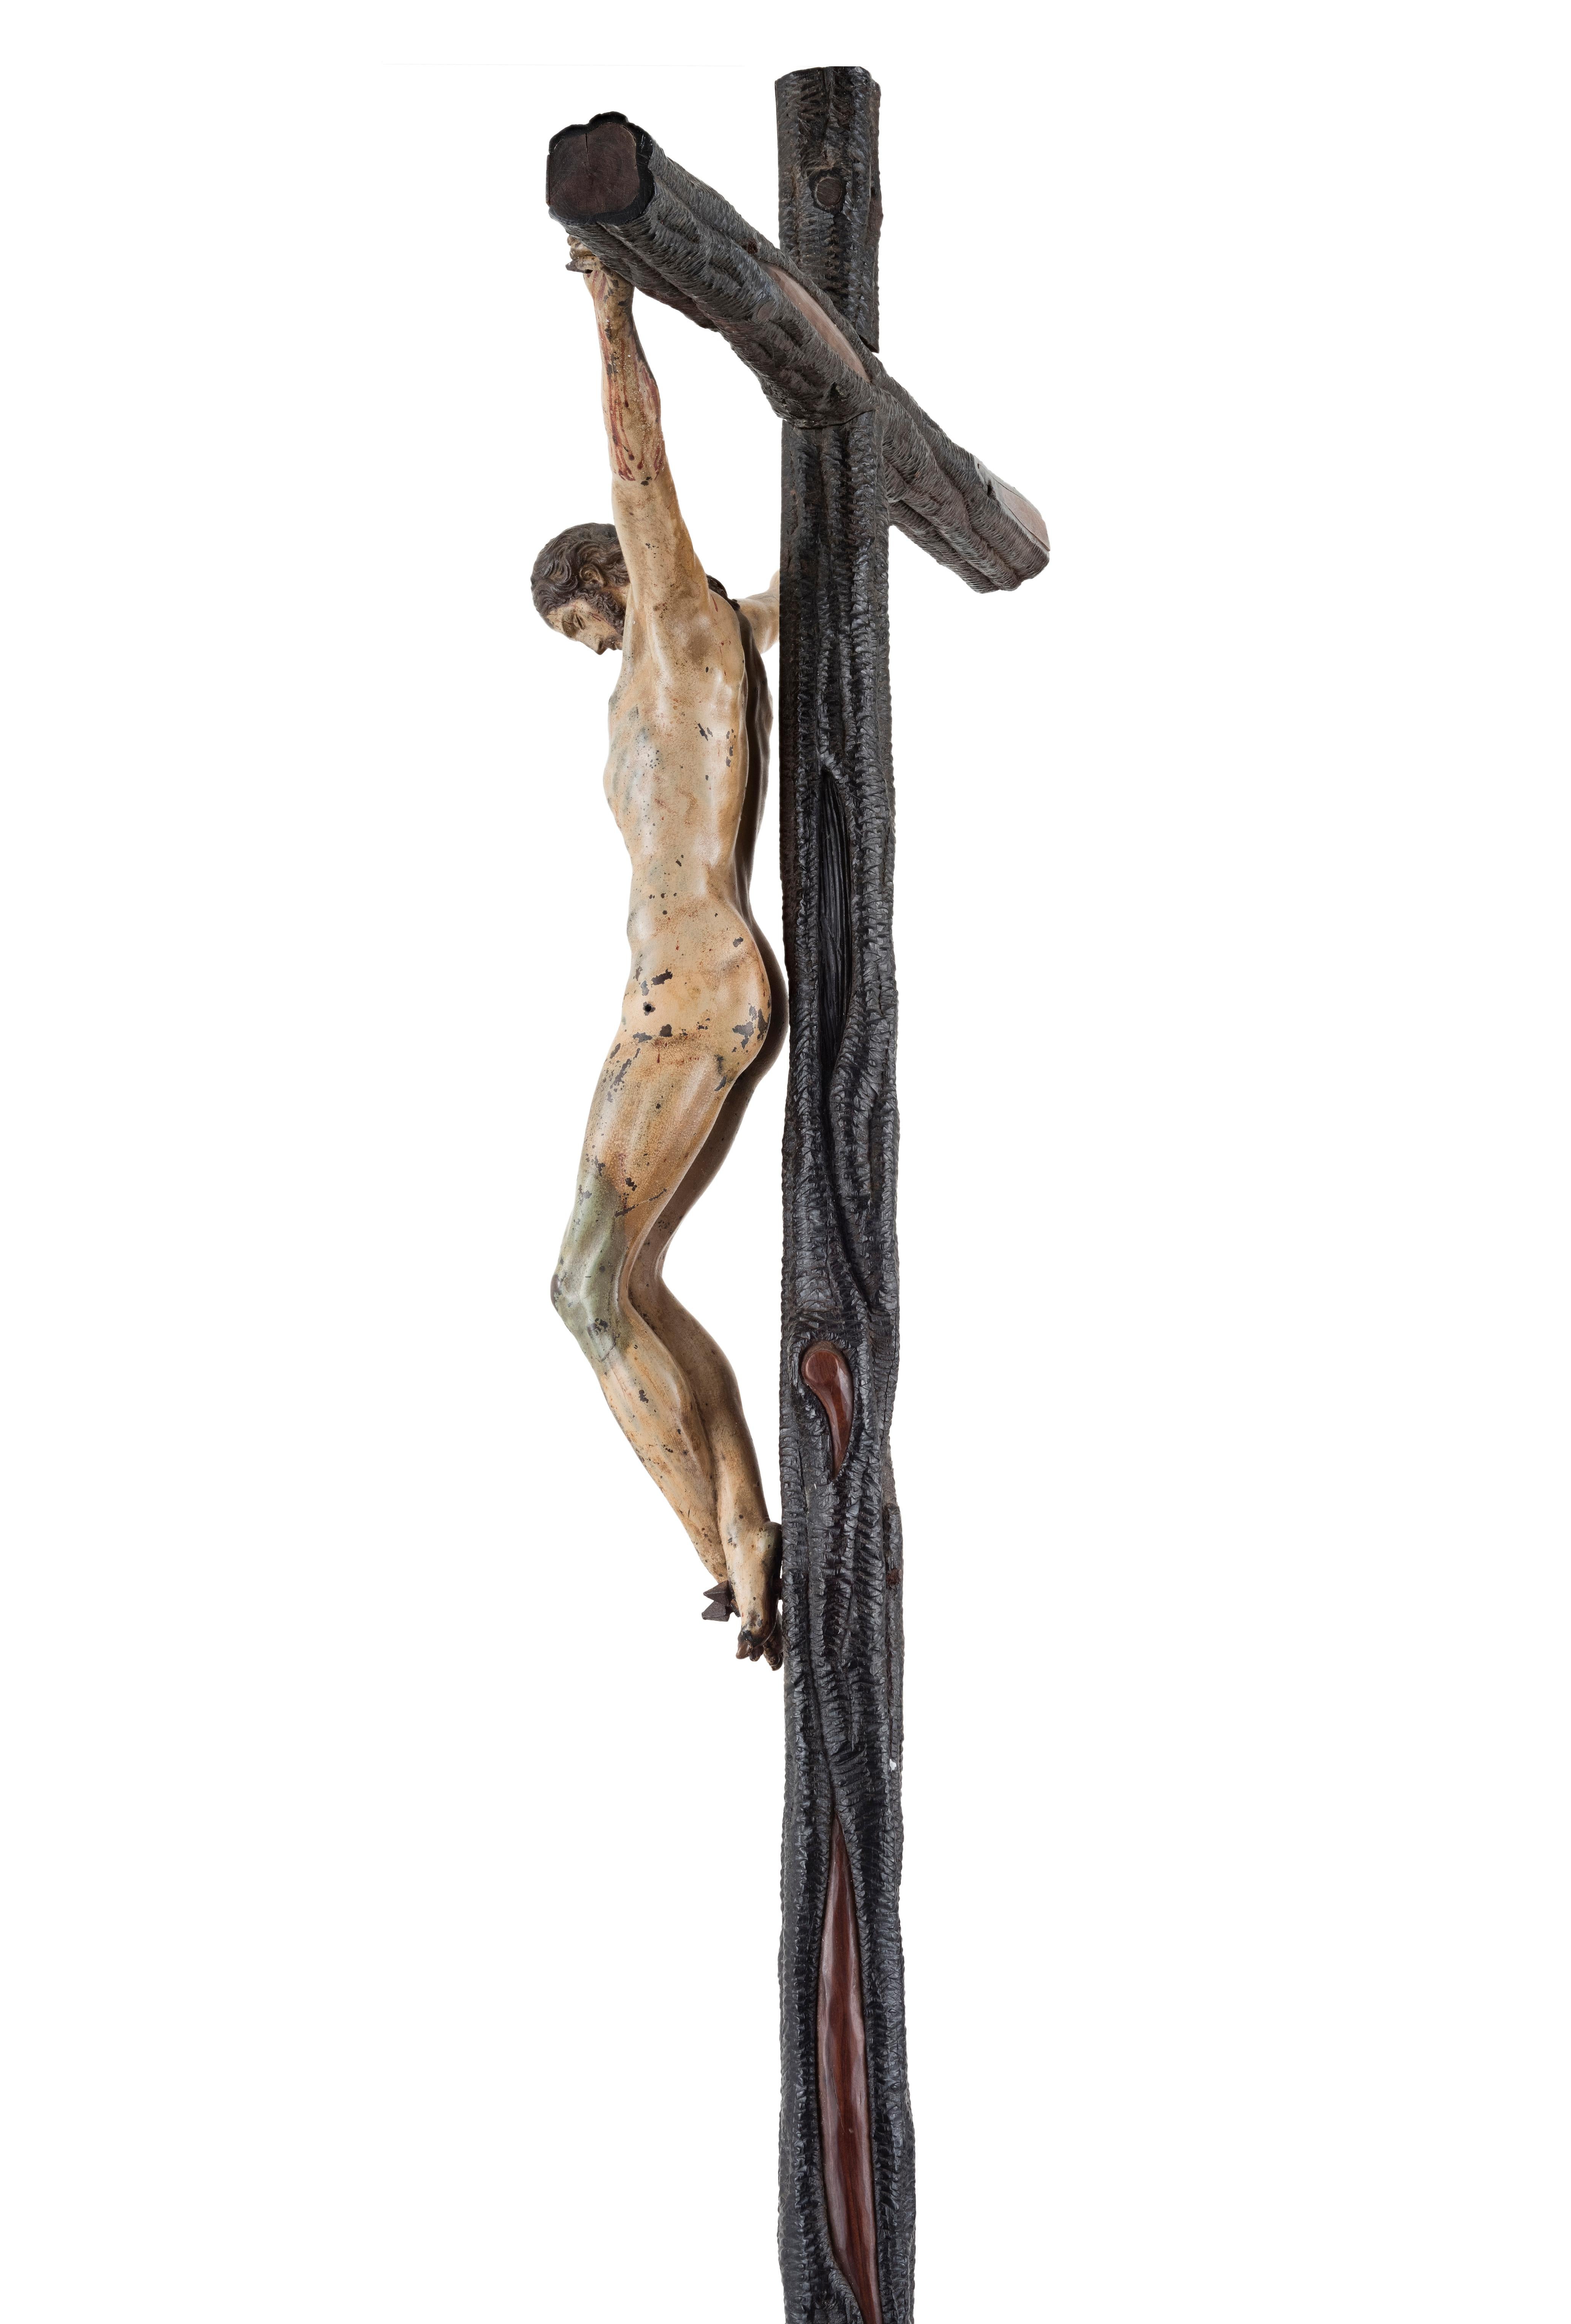 Renaissance Rare and important painted bronze Crucifix after a model by Michelangelo For Sale